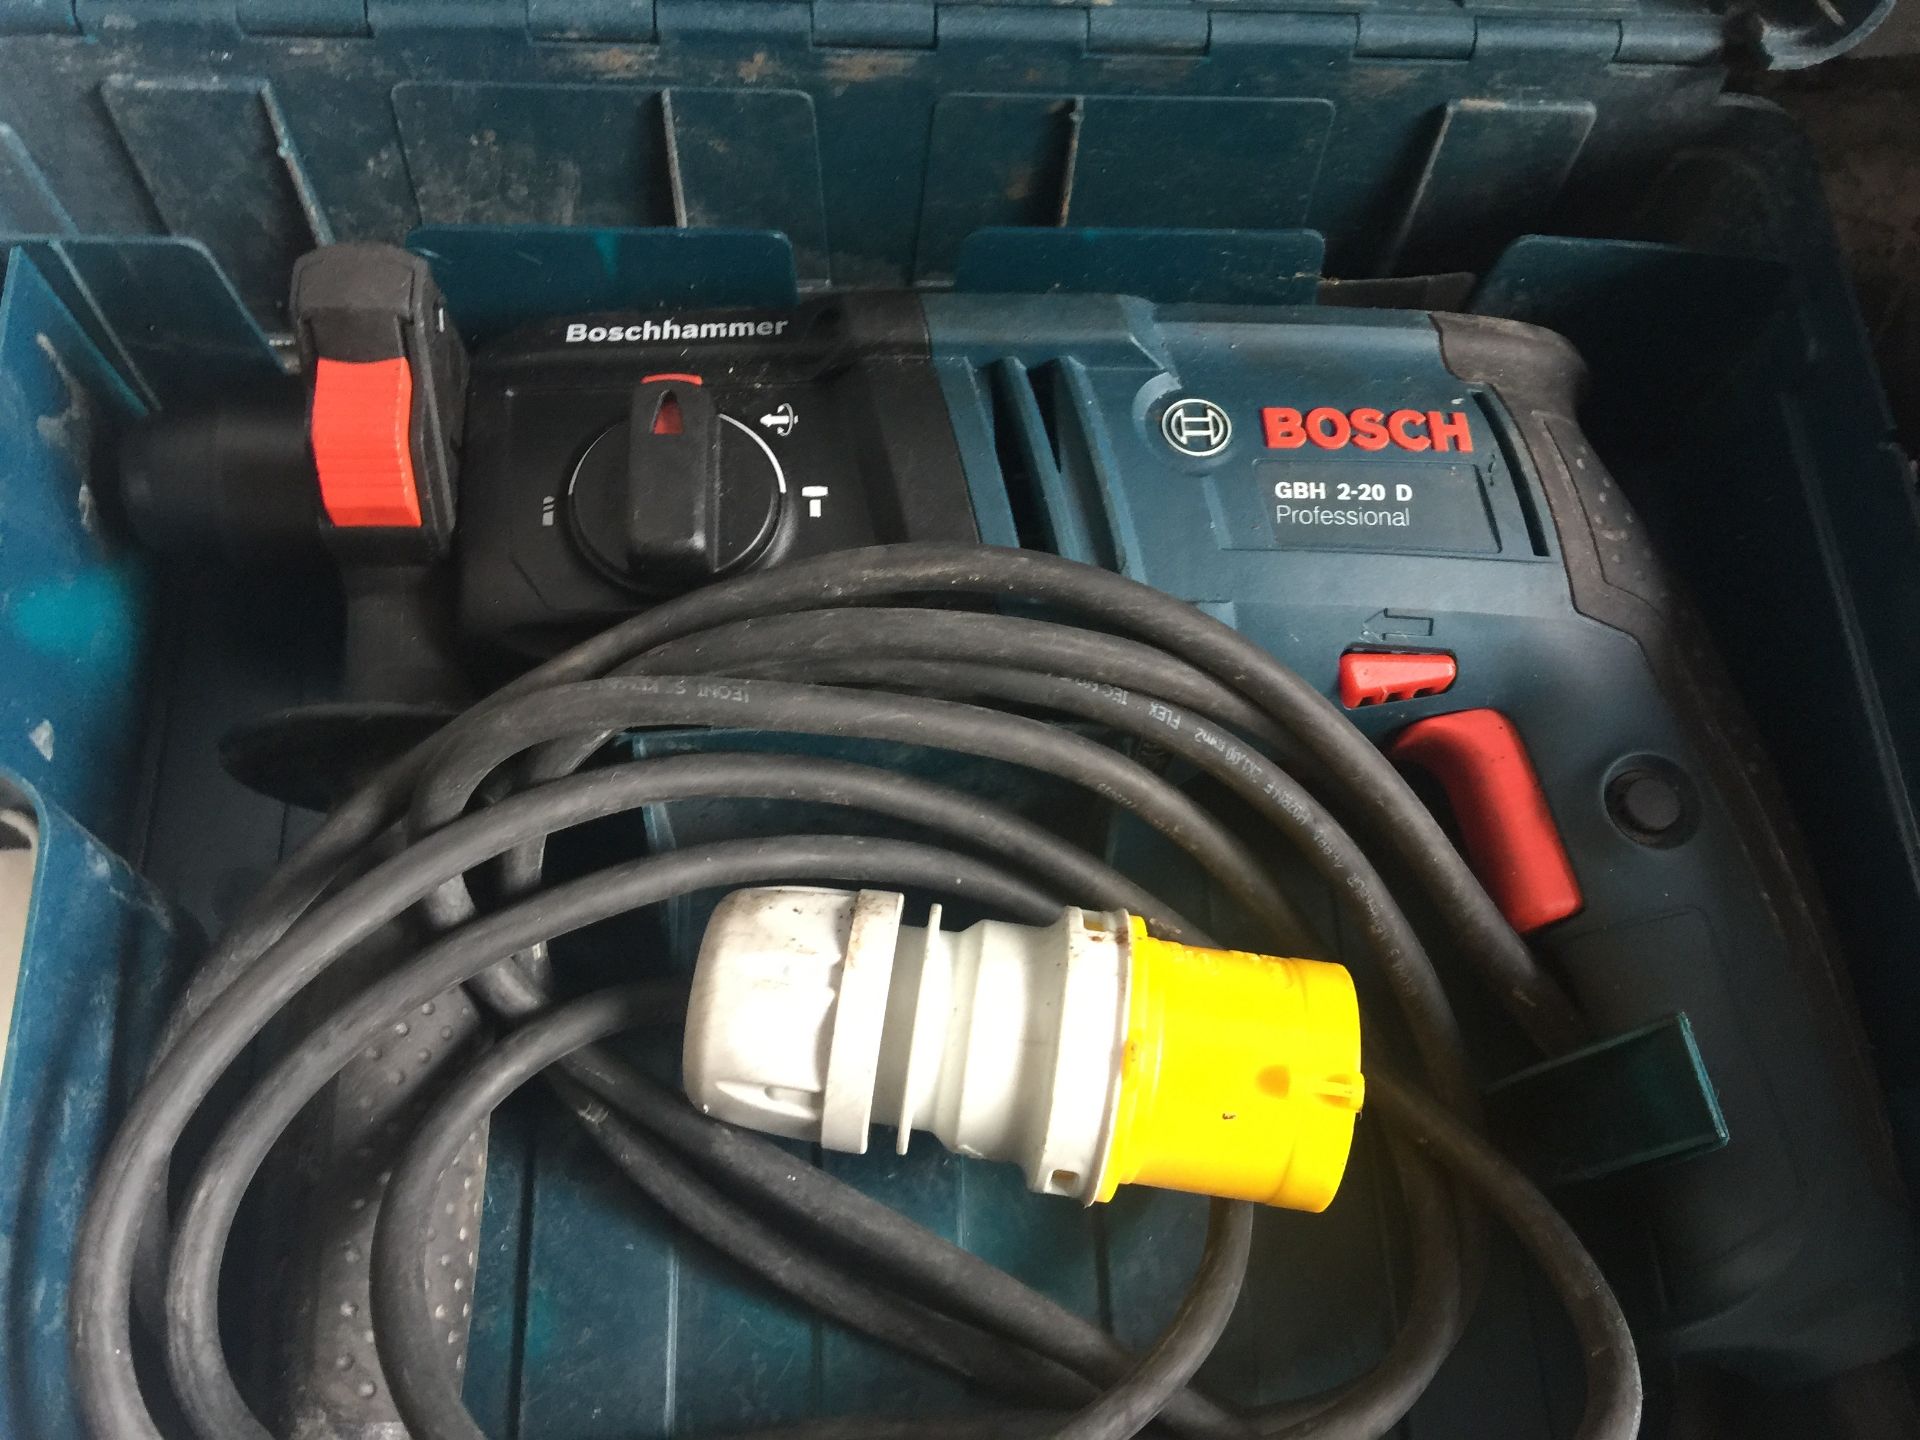 Cased Skill Saw. Hitachi grinder and Bosch GBH 2-20 D professional heavy duty drill - Image 4 of 4